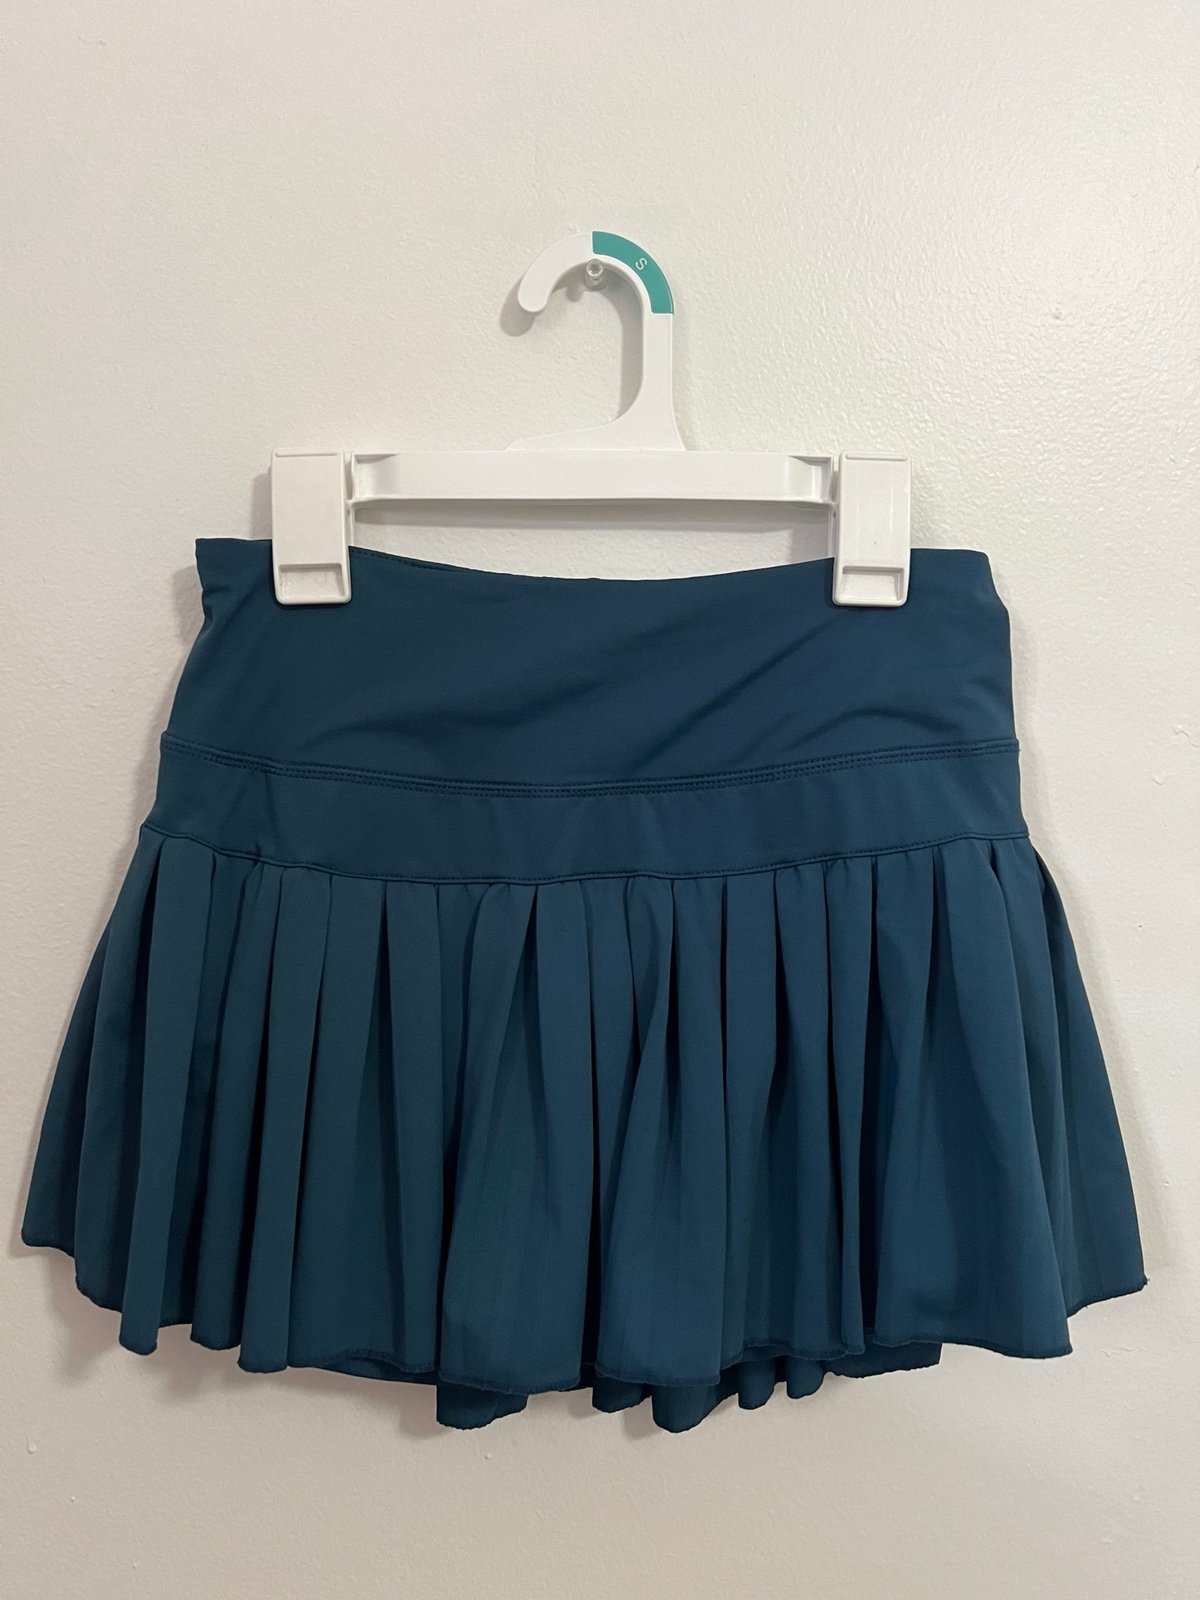 Popular Goldhinge Skirt Pleated Tennis Golf Activewear Size M TEAL HD0q25sUp Everyday Low Prices